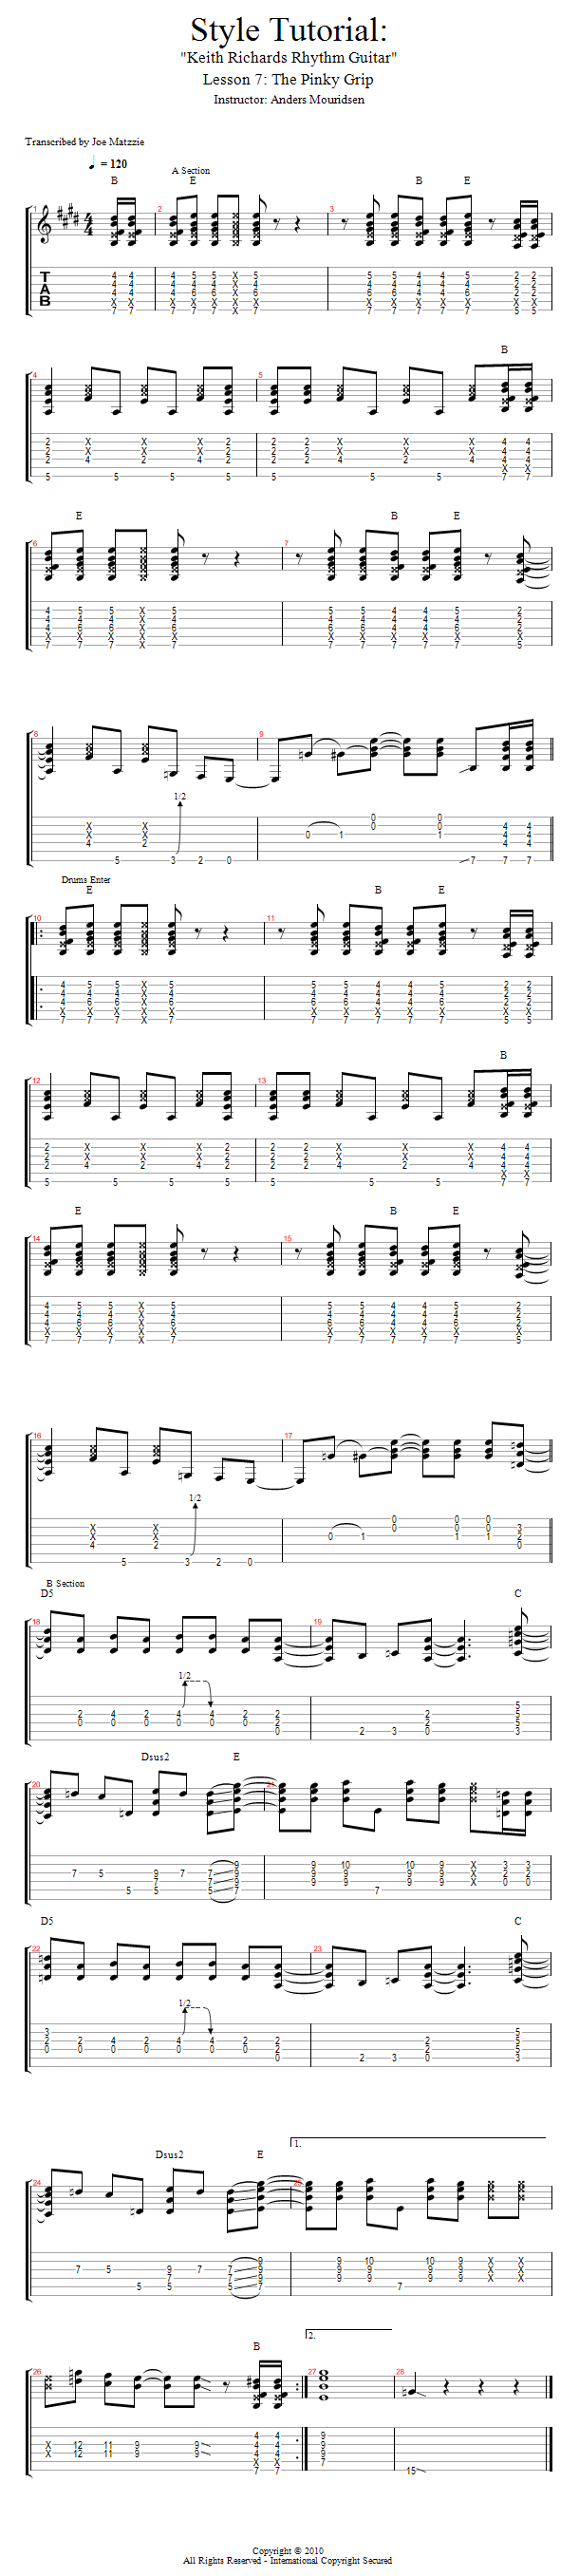 The Pinky Grip song notation